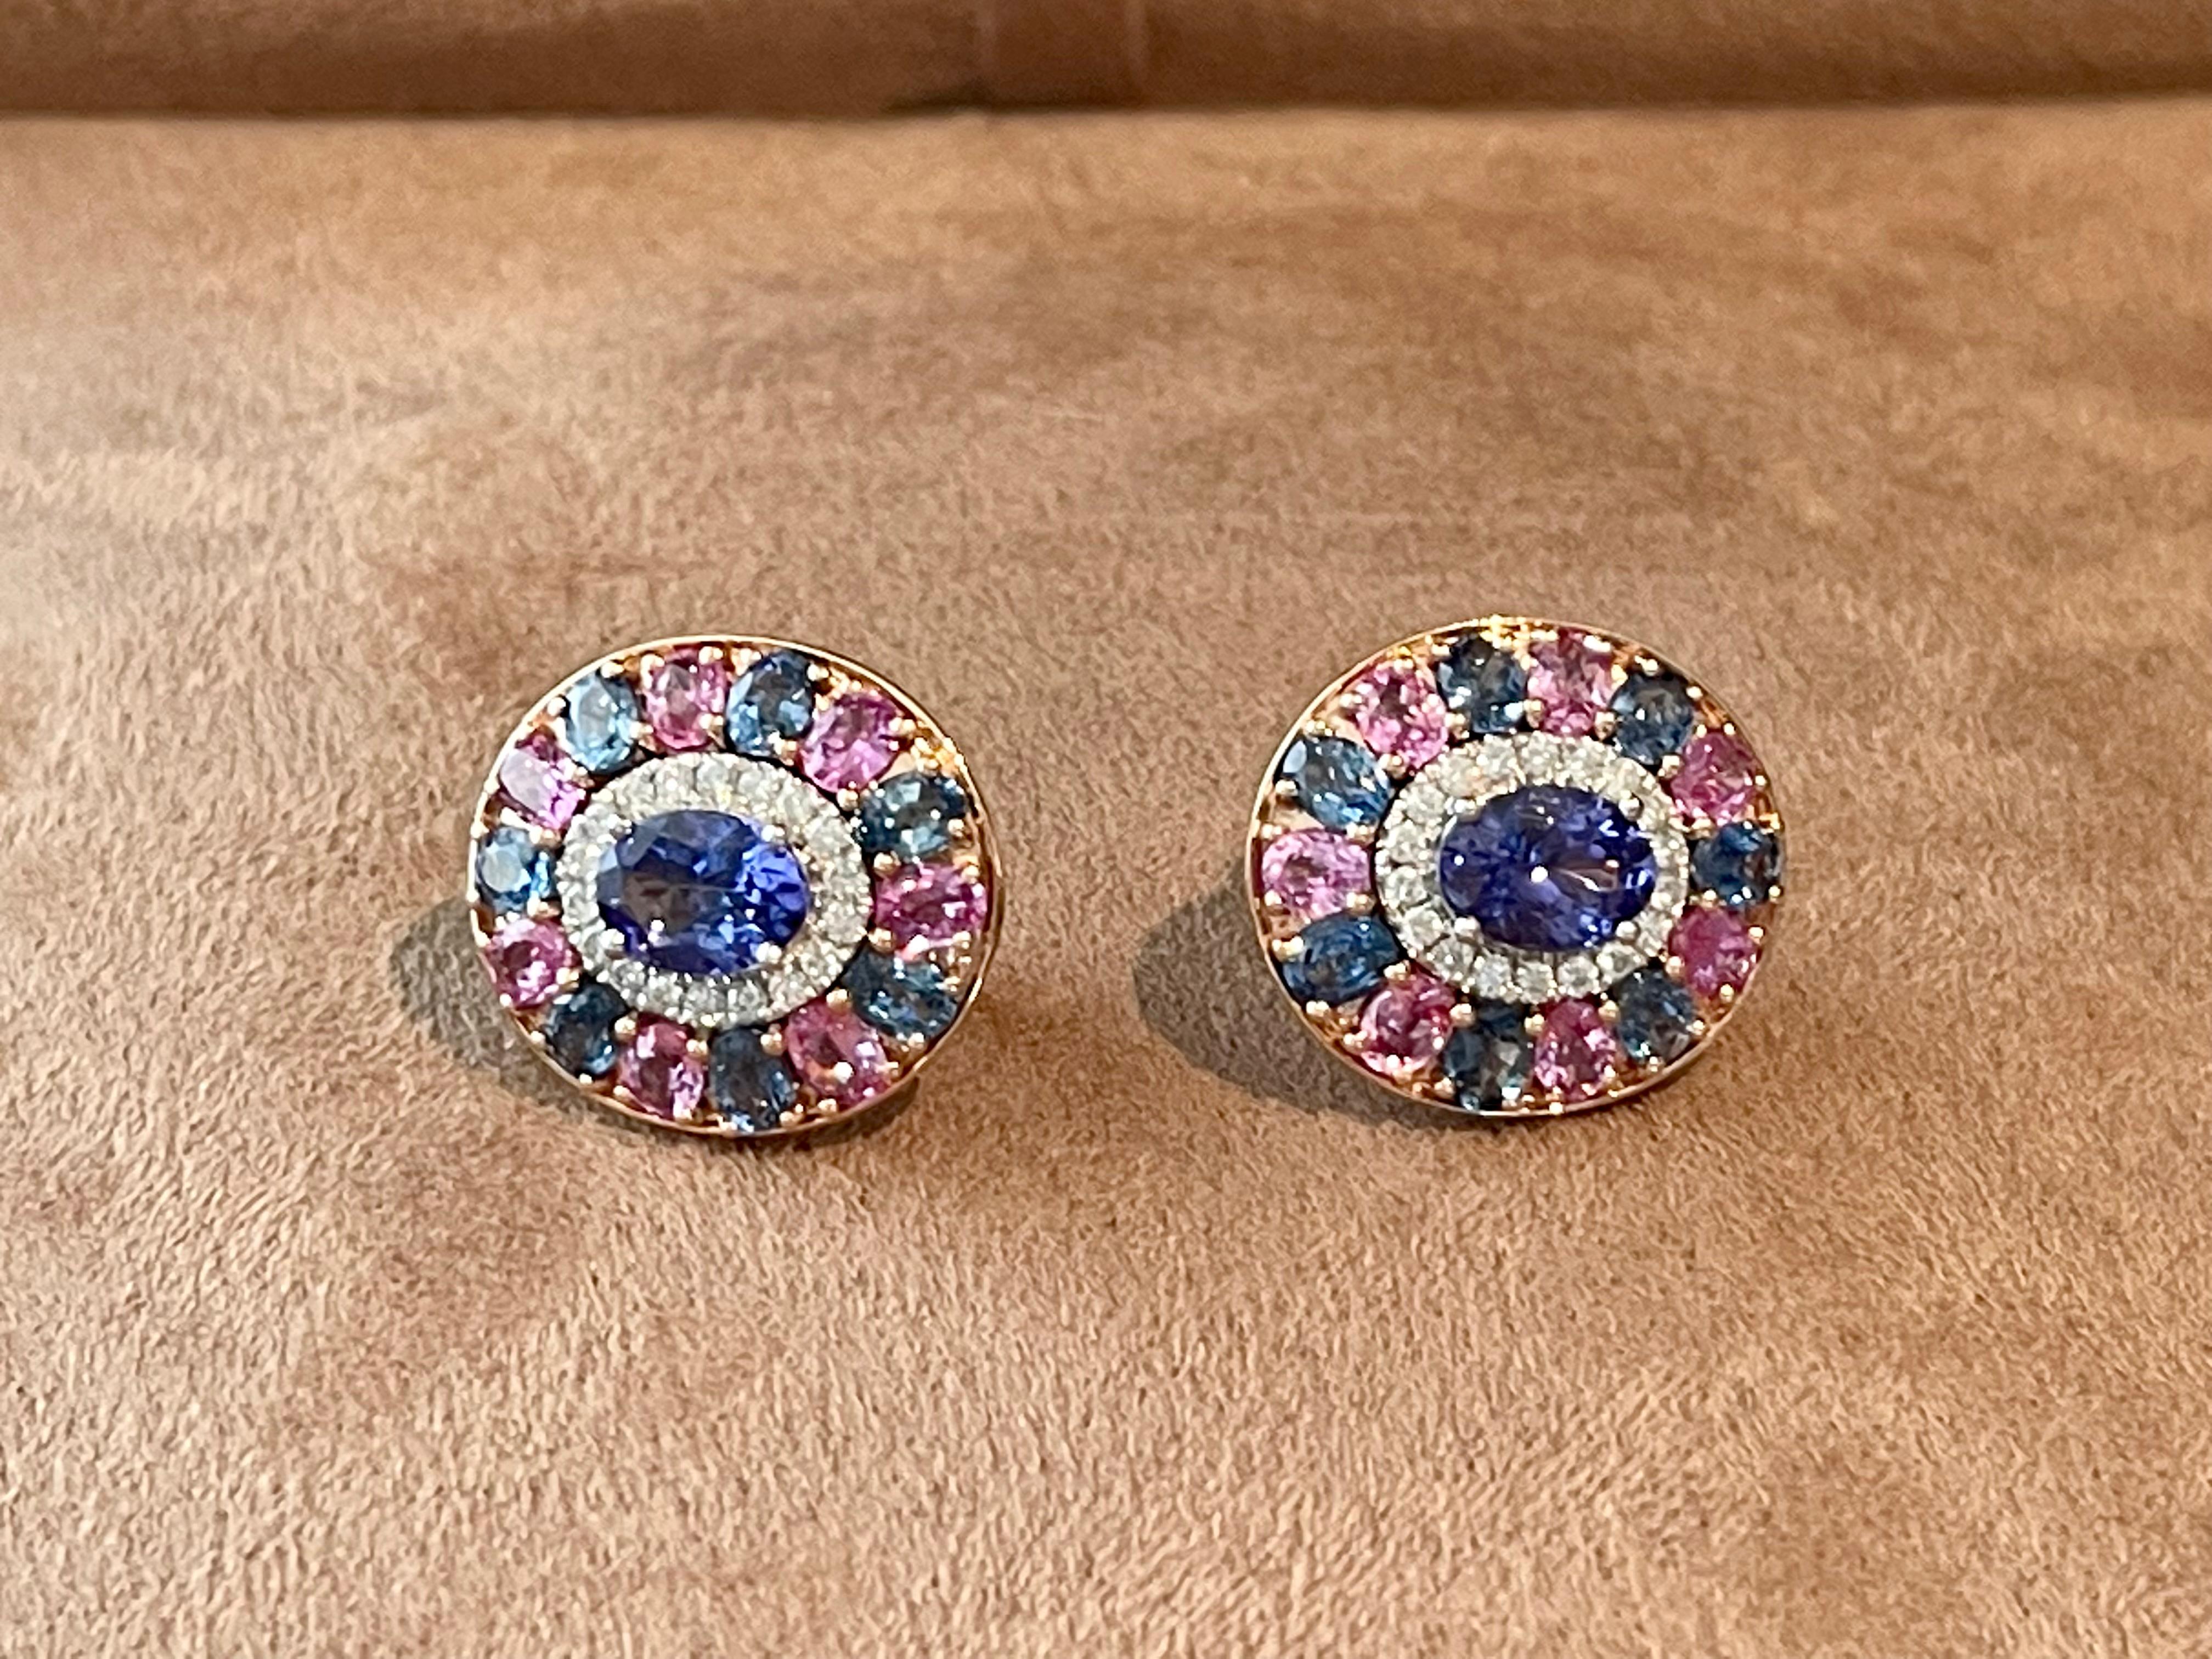 18k Rose Gold Cluster Earrings Tanzanite Pink Sappire Blue Sapphire Diamond For Sale 4